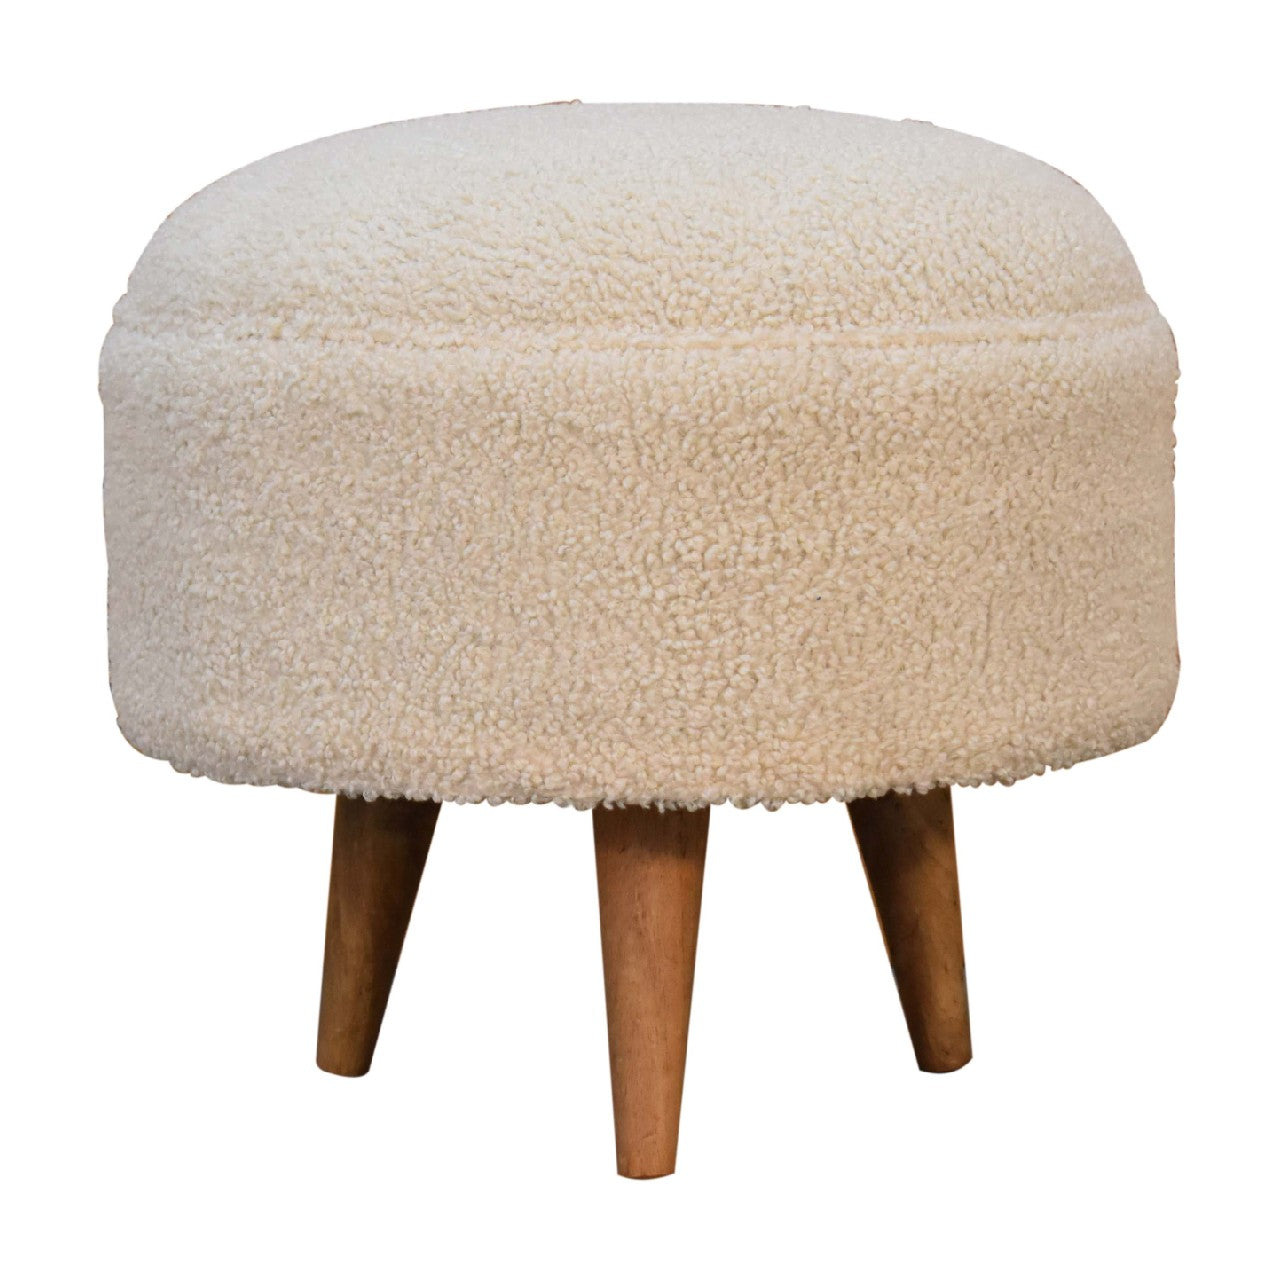 View Cream Boucle Rounded Footstool information